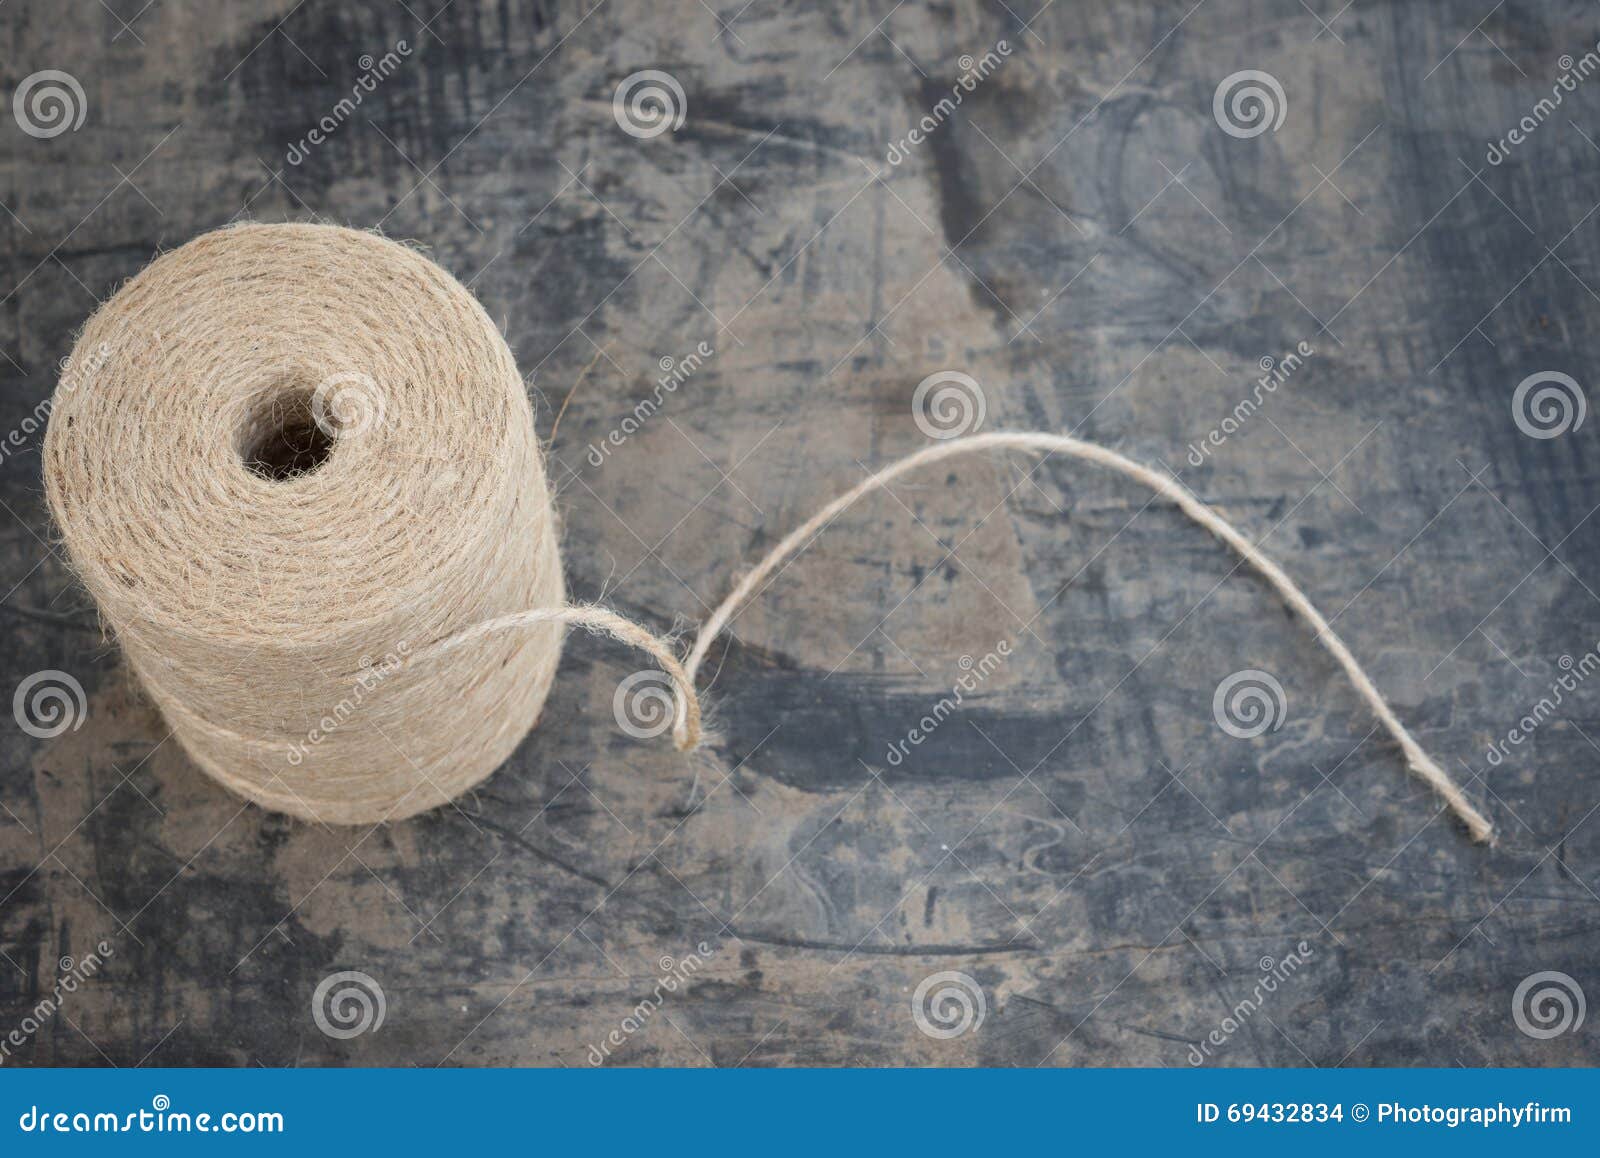 Roll of Light Brown Twine Trailing a Thread Stock Photo - Image of